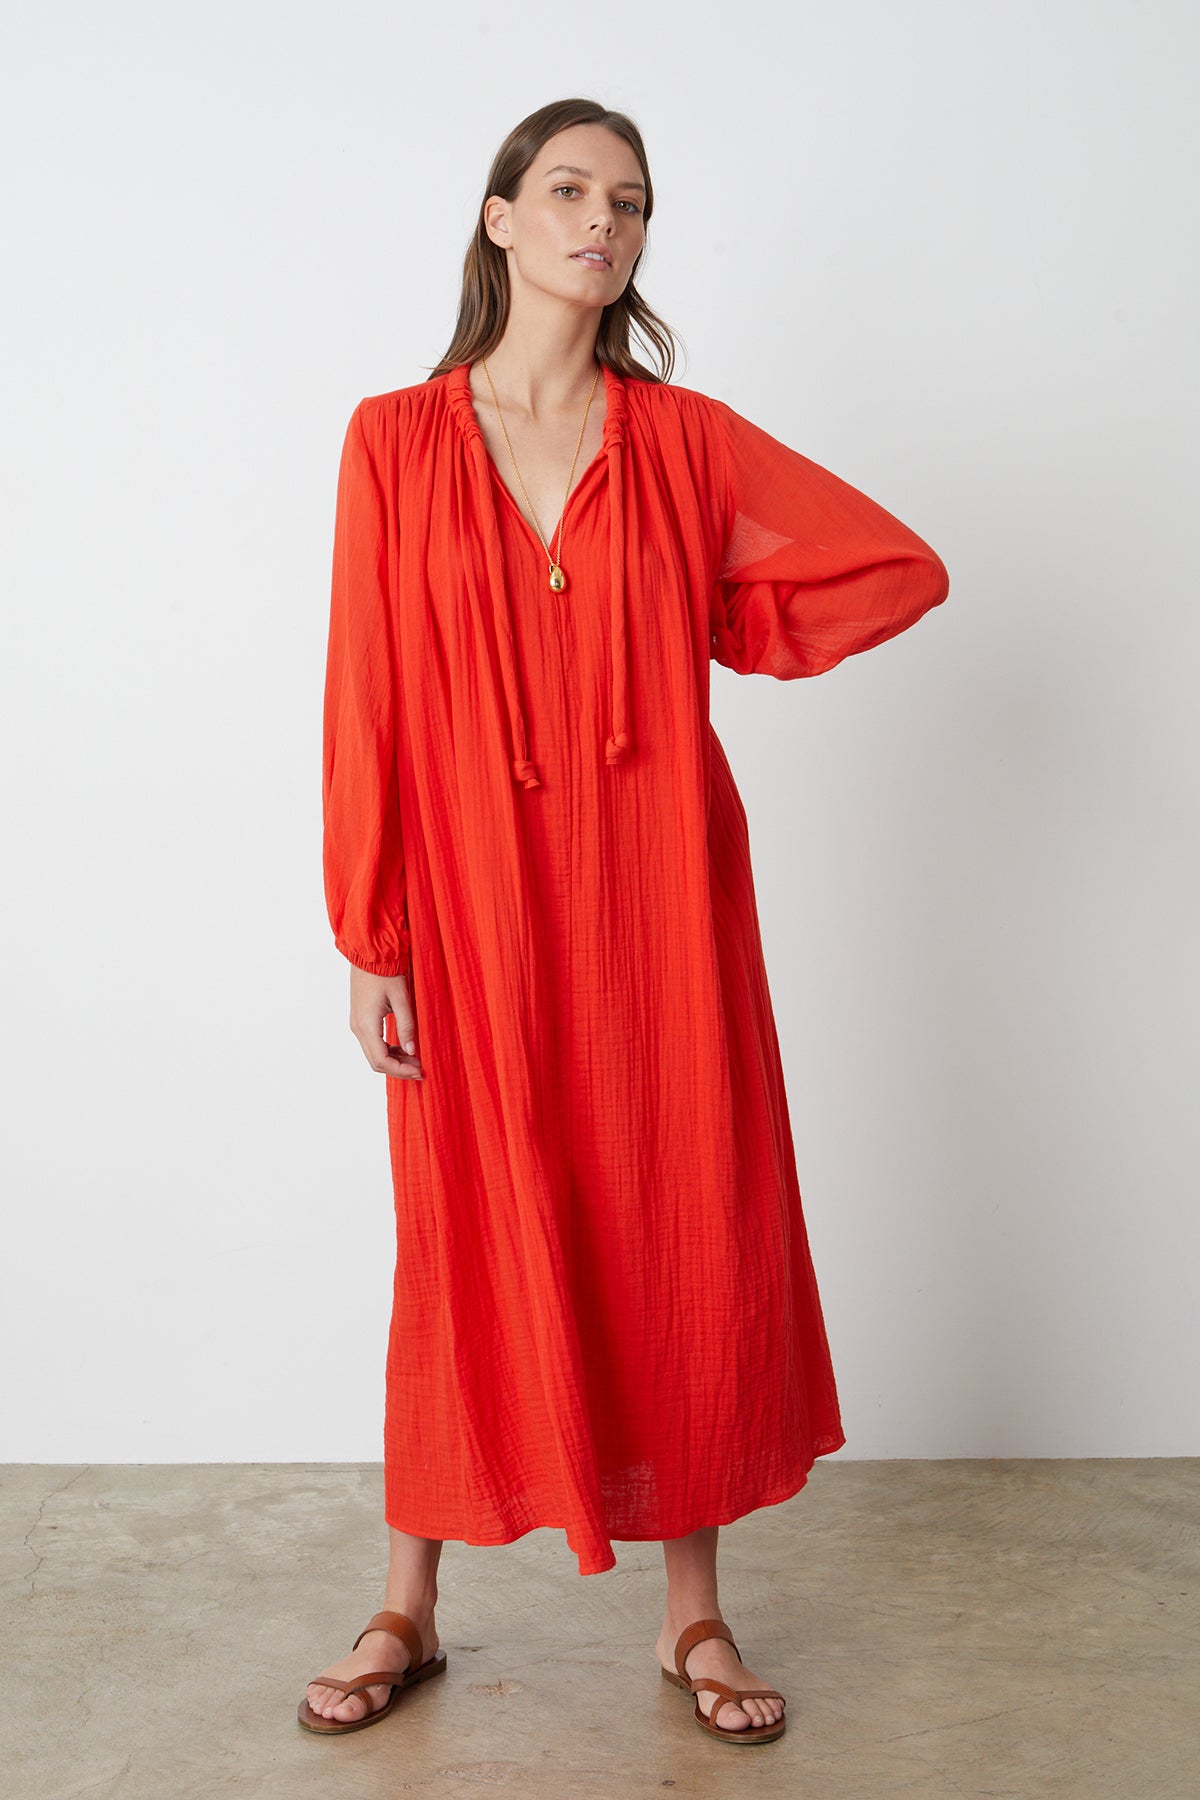 Carmella Maxi Dress in bright red cardinal color gauze model with one hand on hip facing front with gold necklace full length front-26255708324033